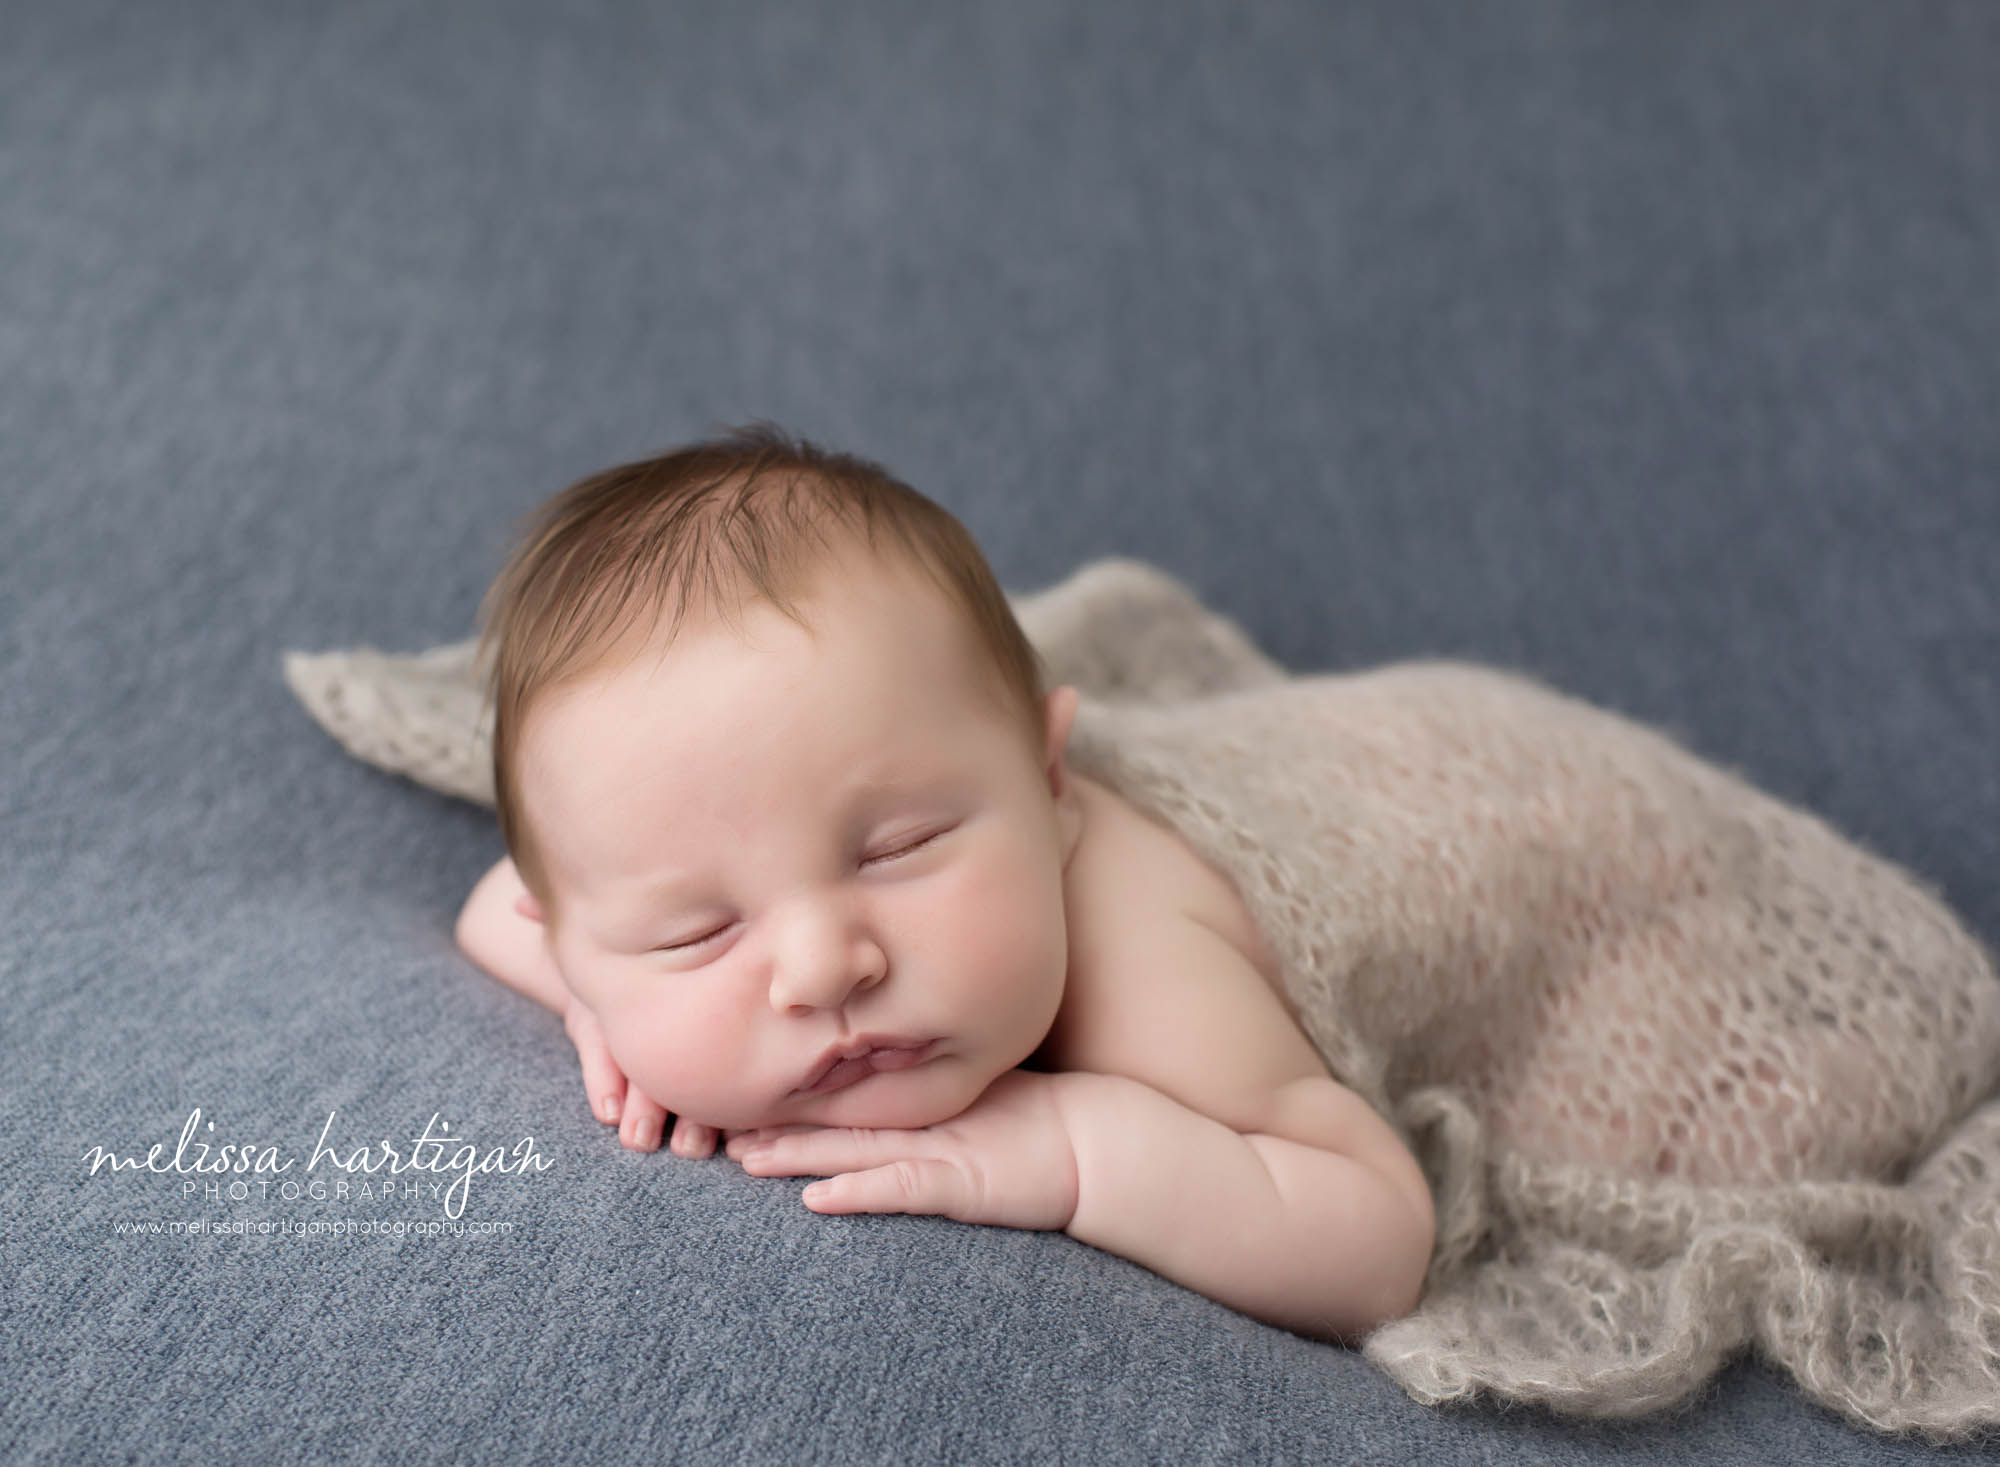 baby posed posed on blue blanket backdrop with light gray knitted wrap